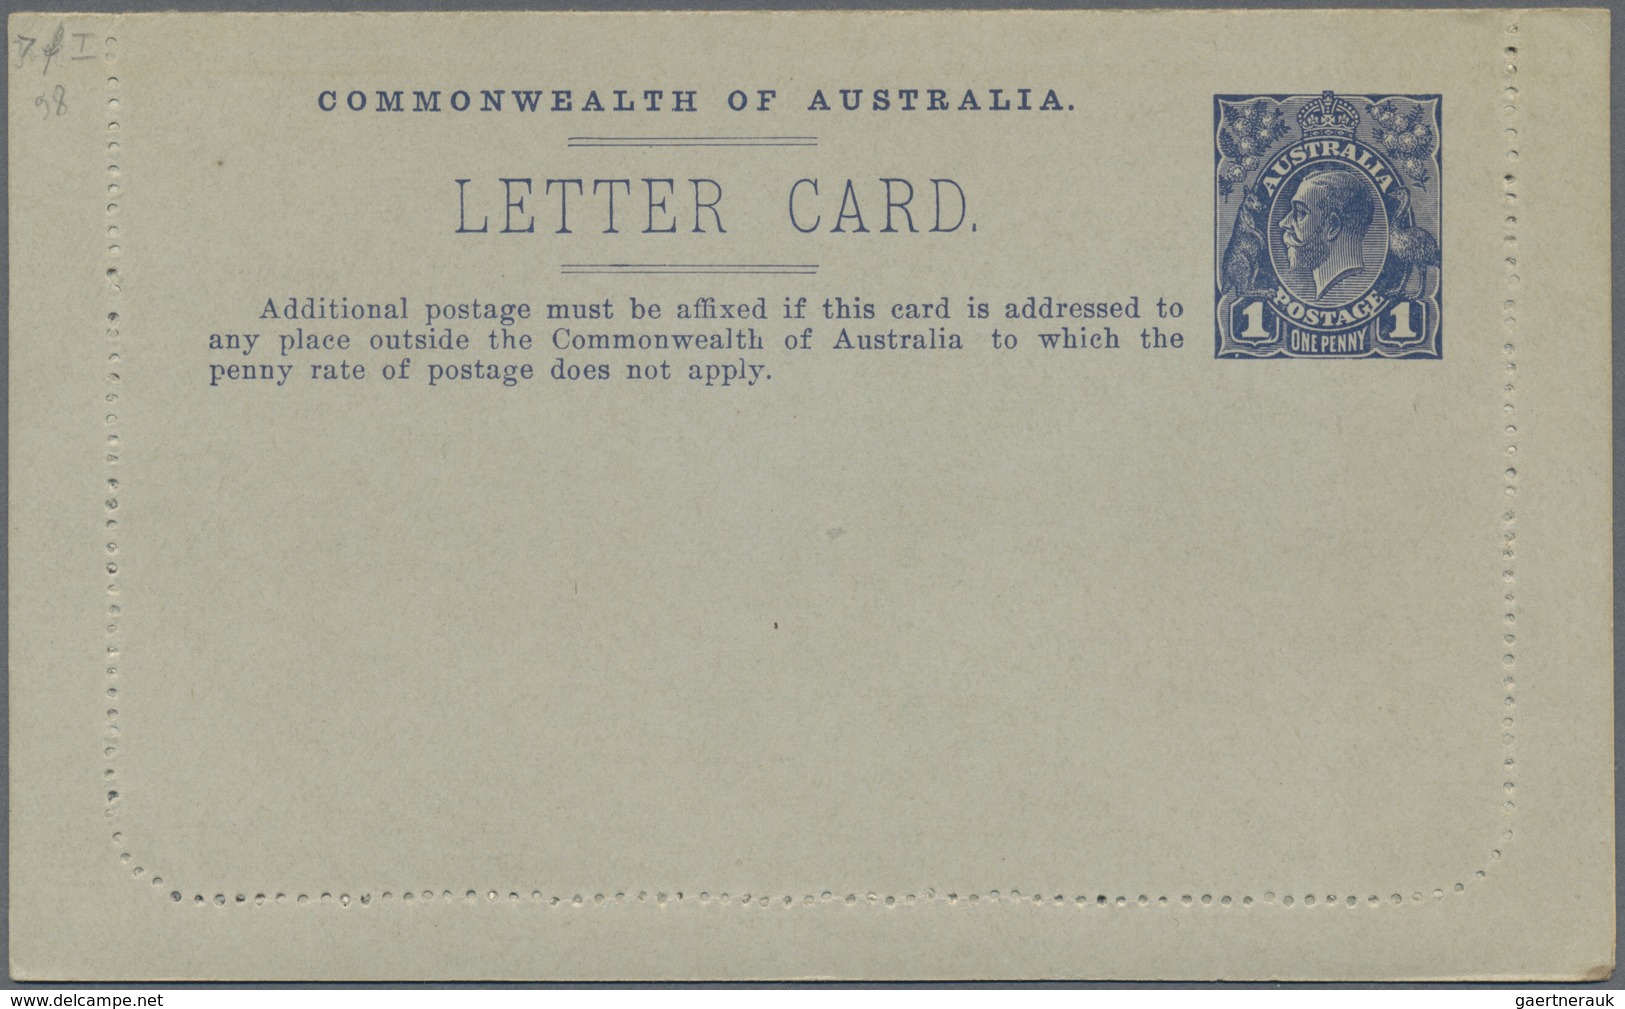 GA Australien - Ganzsachen: 1914, six lettercards KGV 1d. die 2 on grey surfaced stock with different p